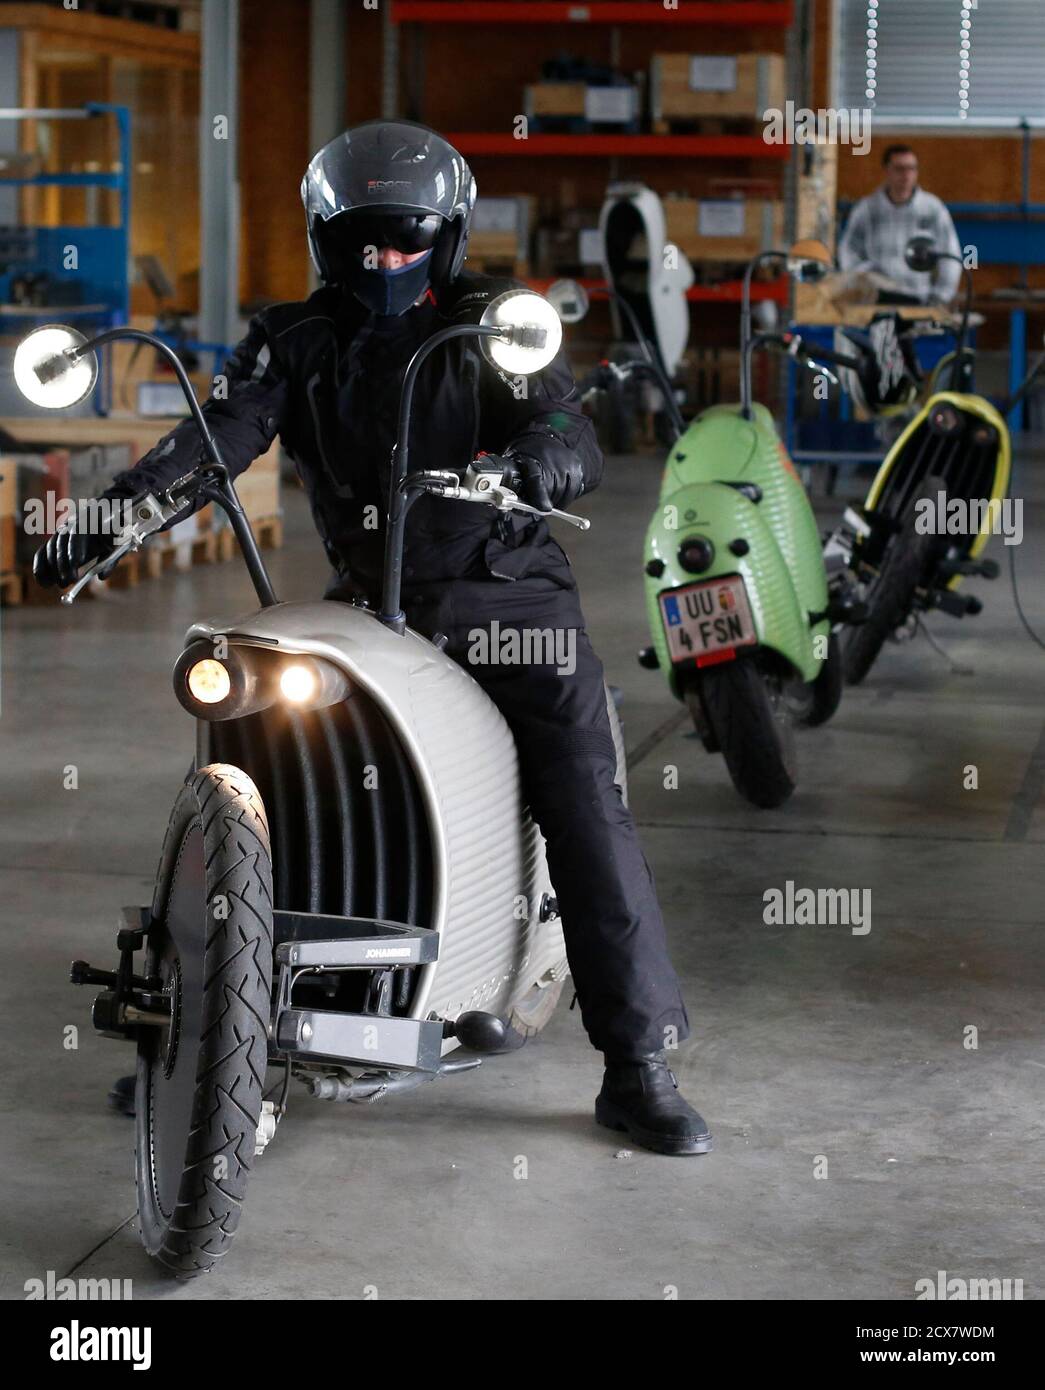 An Employee Of Johammer E Mobility Company Drives A J1 0 Electro Motorcycle Out Of The Company Headquarters In Bad Leonfelden April 23 14 The Johammer J1 0 Is The First Electro Motorbike In The